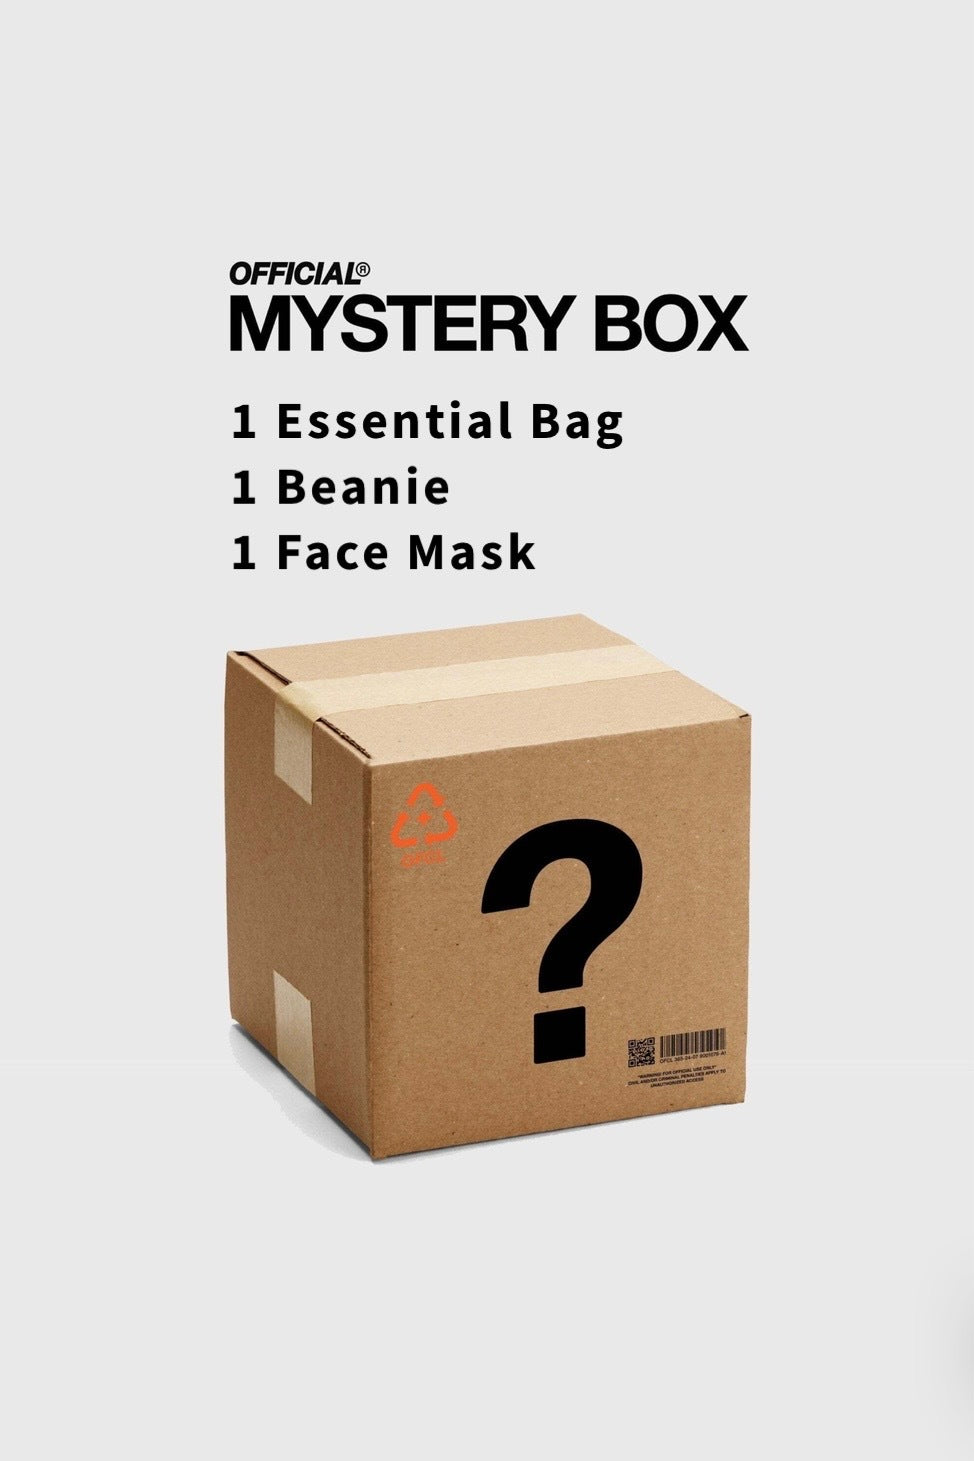 $5,000 JUST ONE MYSTERY BOX! FIRST ONE GETS IT! THERES ONLY 1